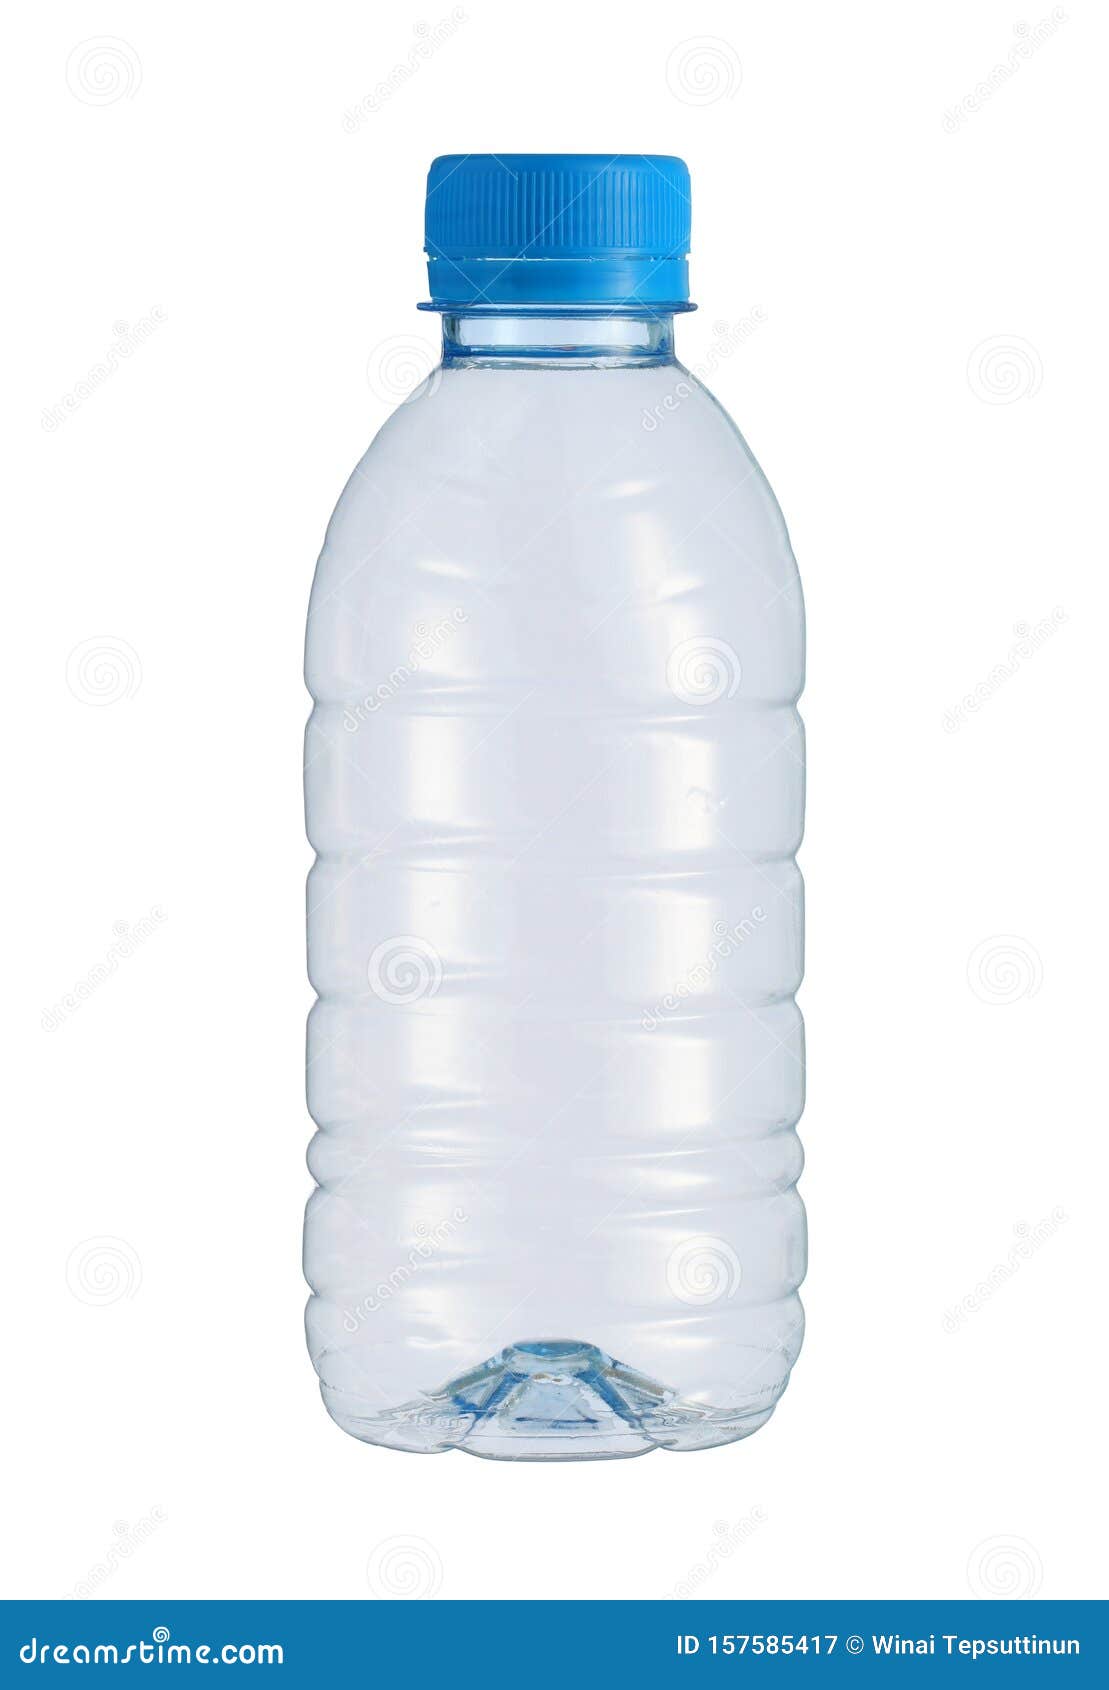 Plastic Small Water Bottle Disposable Stock Image - Image of